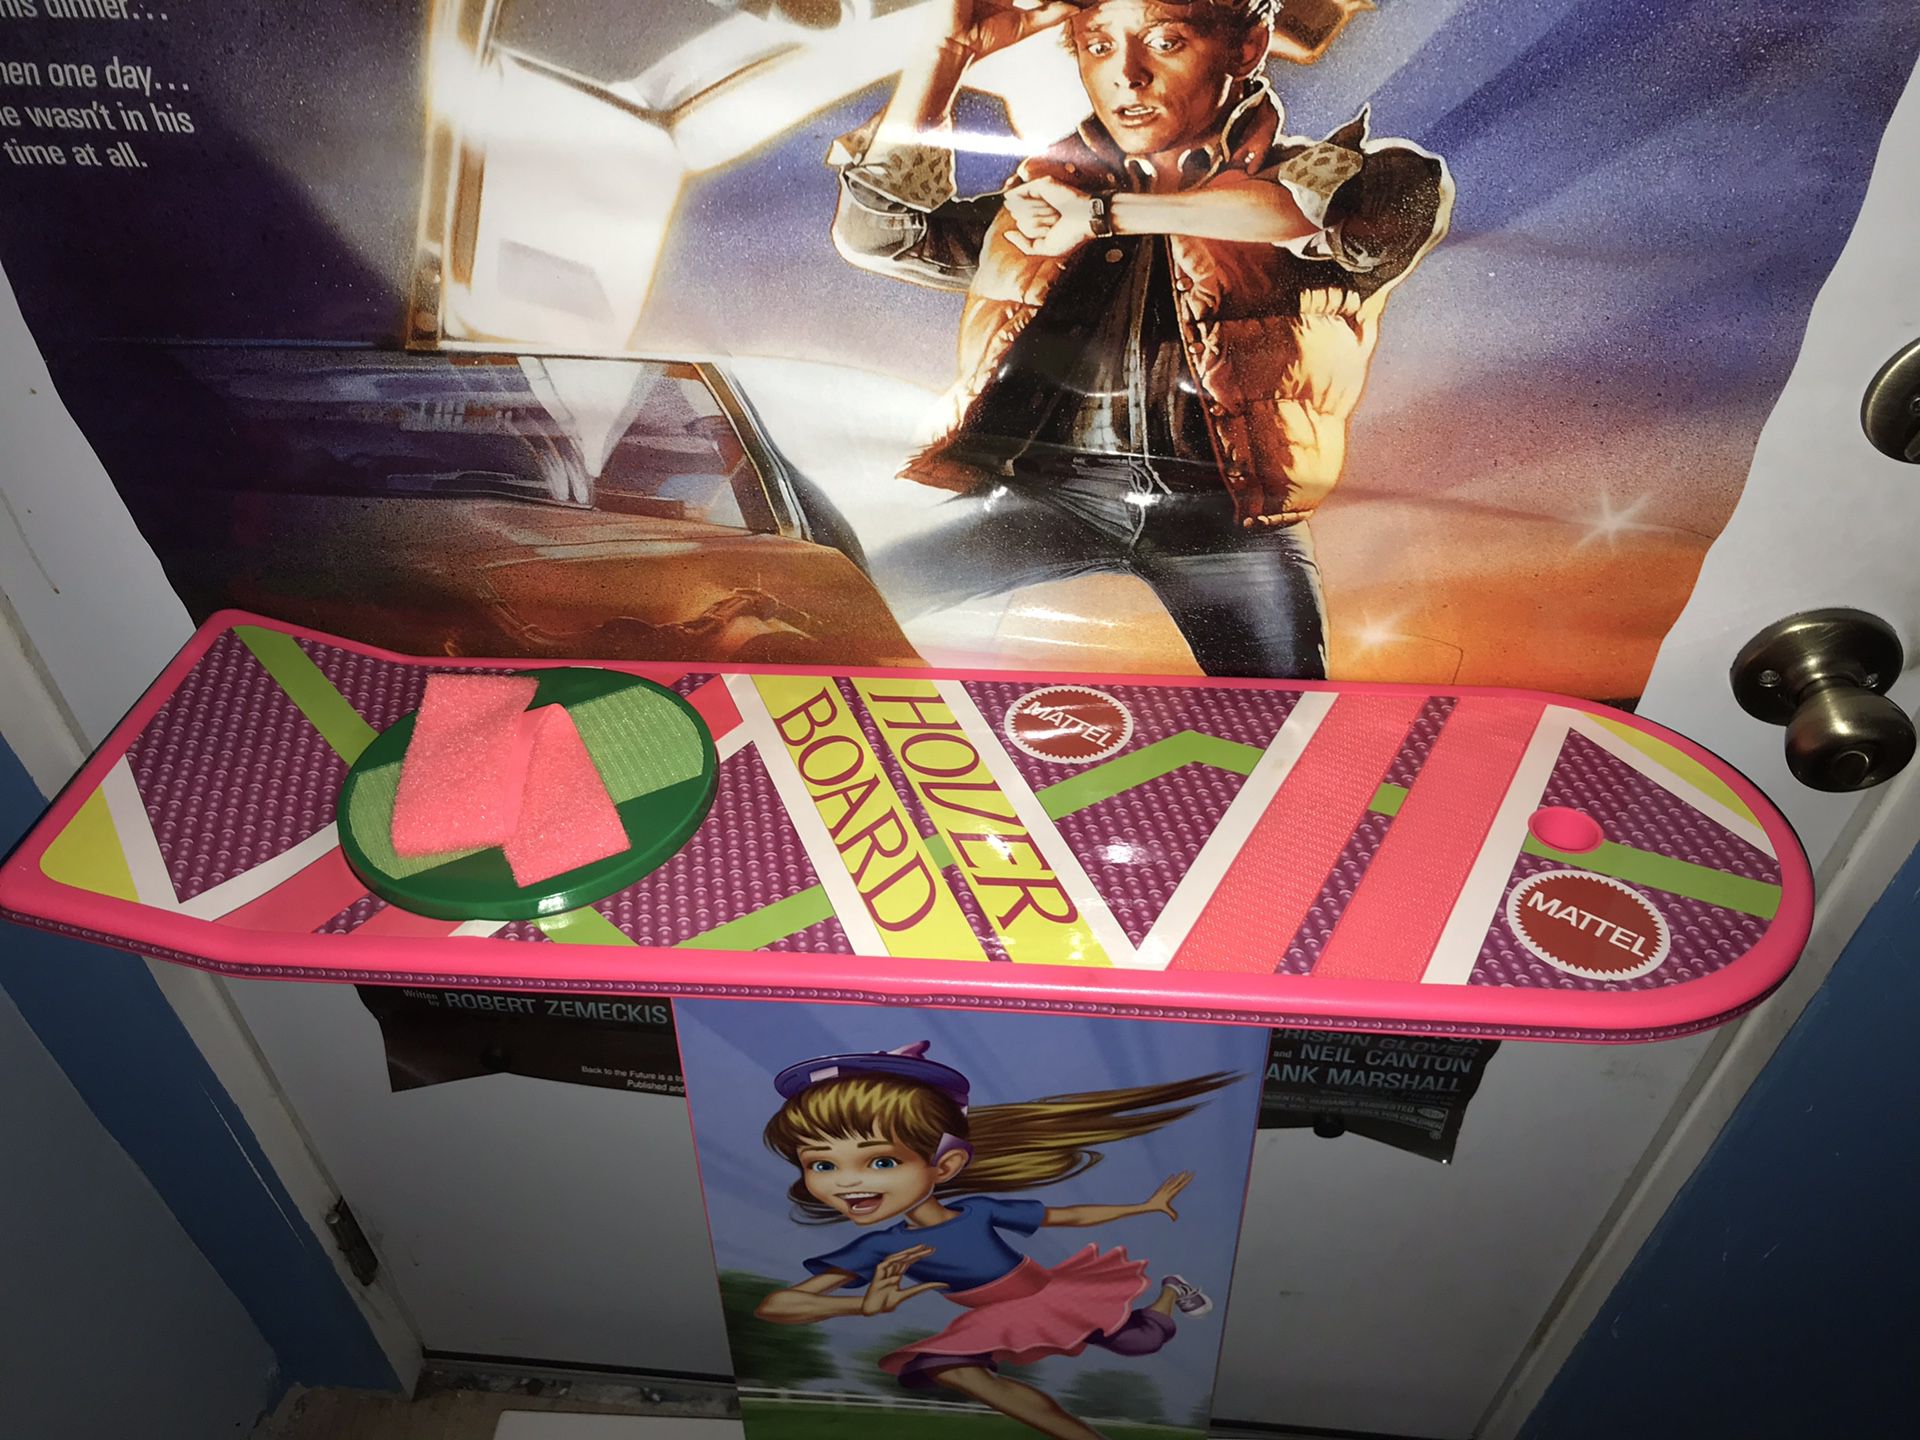 Bttf back to the future hoverboard